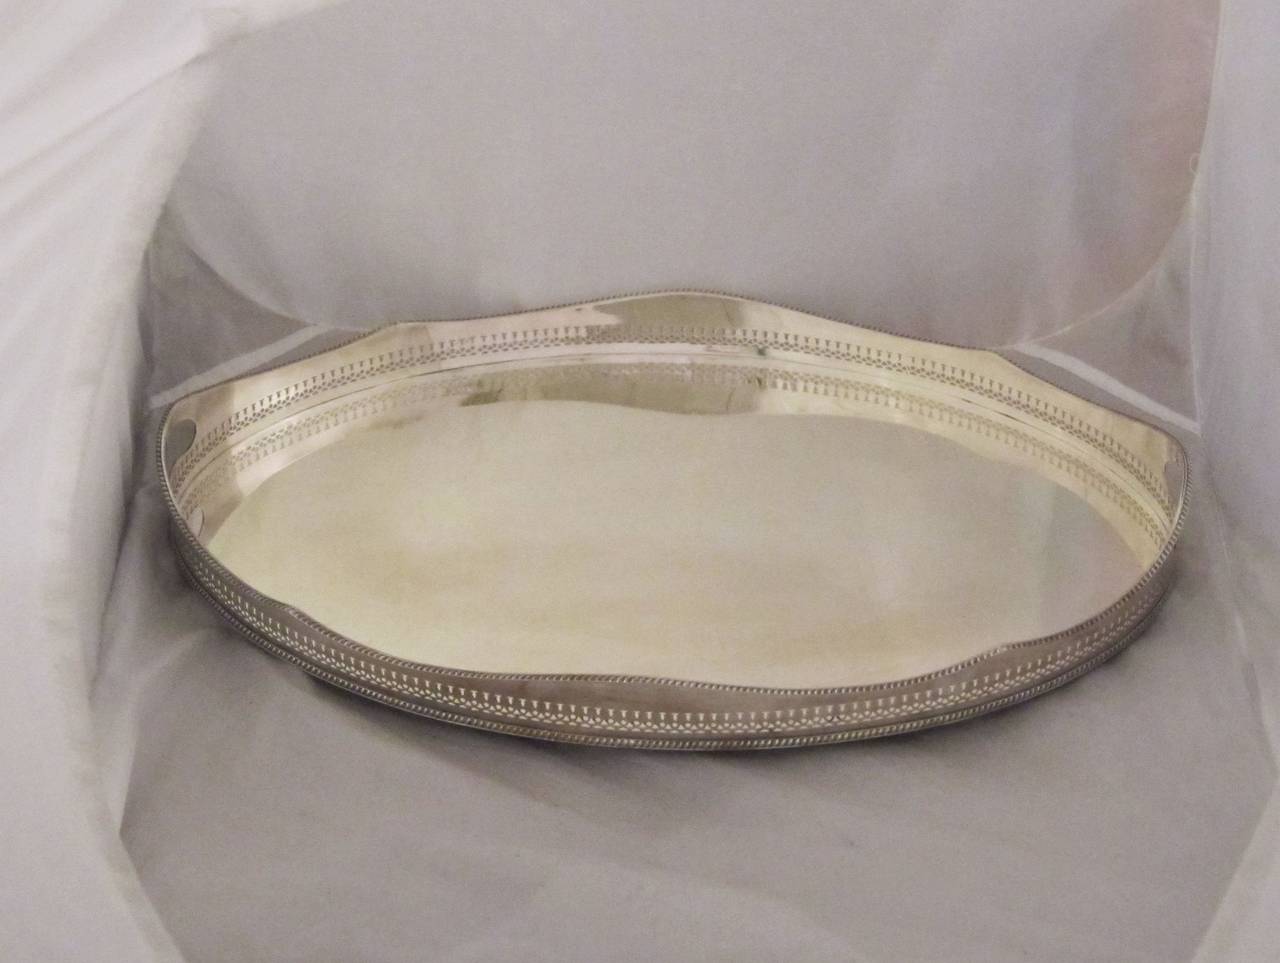 A handsome English oval gallery serving tray with pierced serpentine gallery around the circumference.

We have similar gallery trays in a variety of styles and sizes - Please enquire